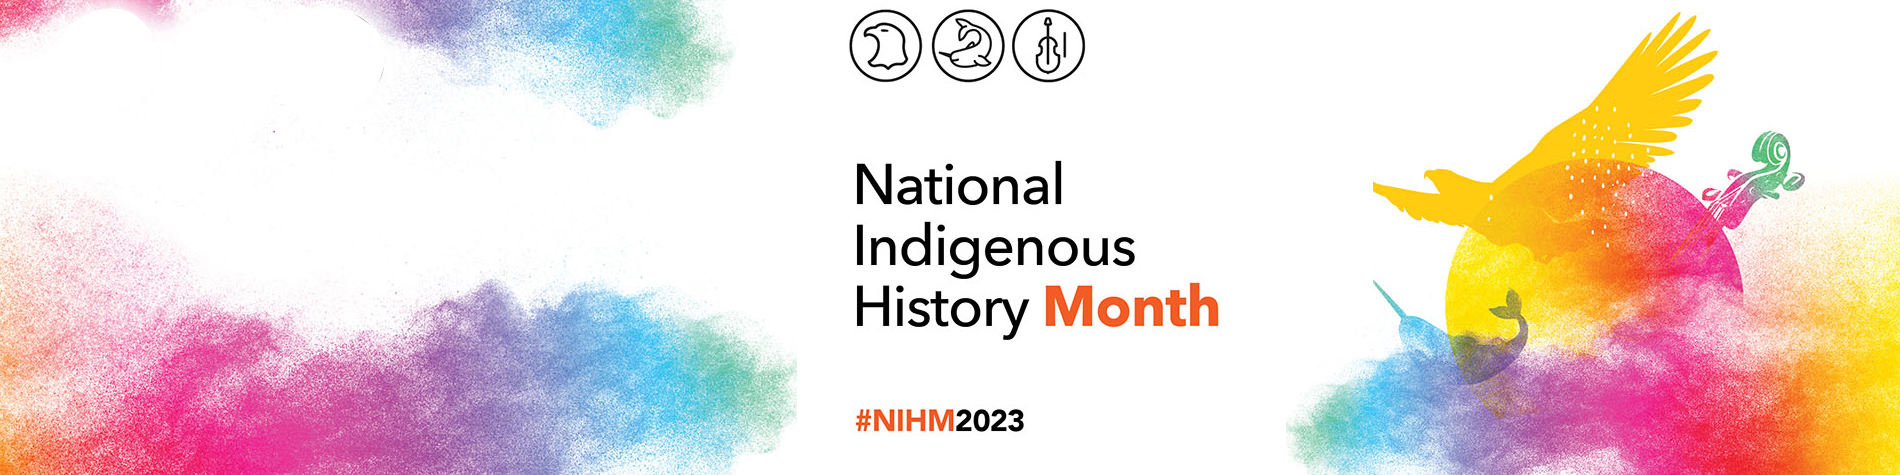 <p class="slider-title">June is National Indigenous History Month</p><div class="banner-line"></div><p class="slider-subtitle">June is National Indigenous History Month, a time to learn about the unique cultures, traditions and experiences of First Nations, Inuit and Metis.</p> <a style="pointer-events:all" class=AEBannerMoreLink href="https://www.cbe.ab.ca/news-centre/Pages/june-is-national-indigenous-history-month-2023.aspx">Read More</a>